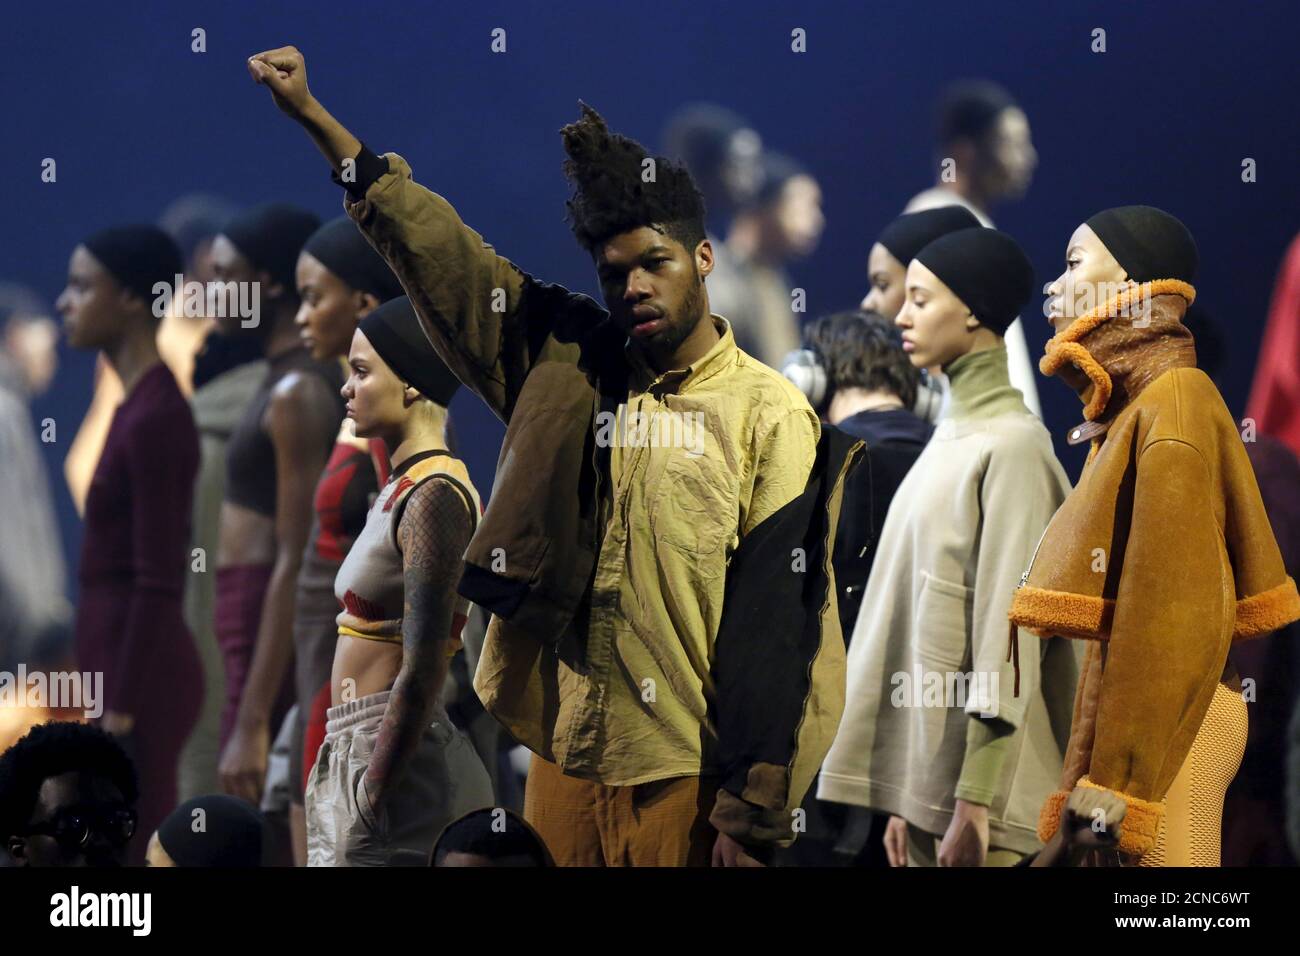 Models present creations at Kanye West's Yeezy Season 3 Collection  presentation and listening party for the "The Life of Pablo" album during  New York Fashion Week February 11, 2016. REUTERS/Andrew Kelly TPX